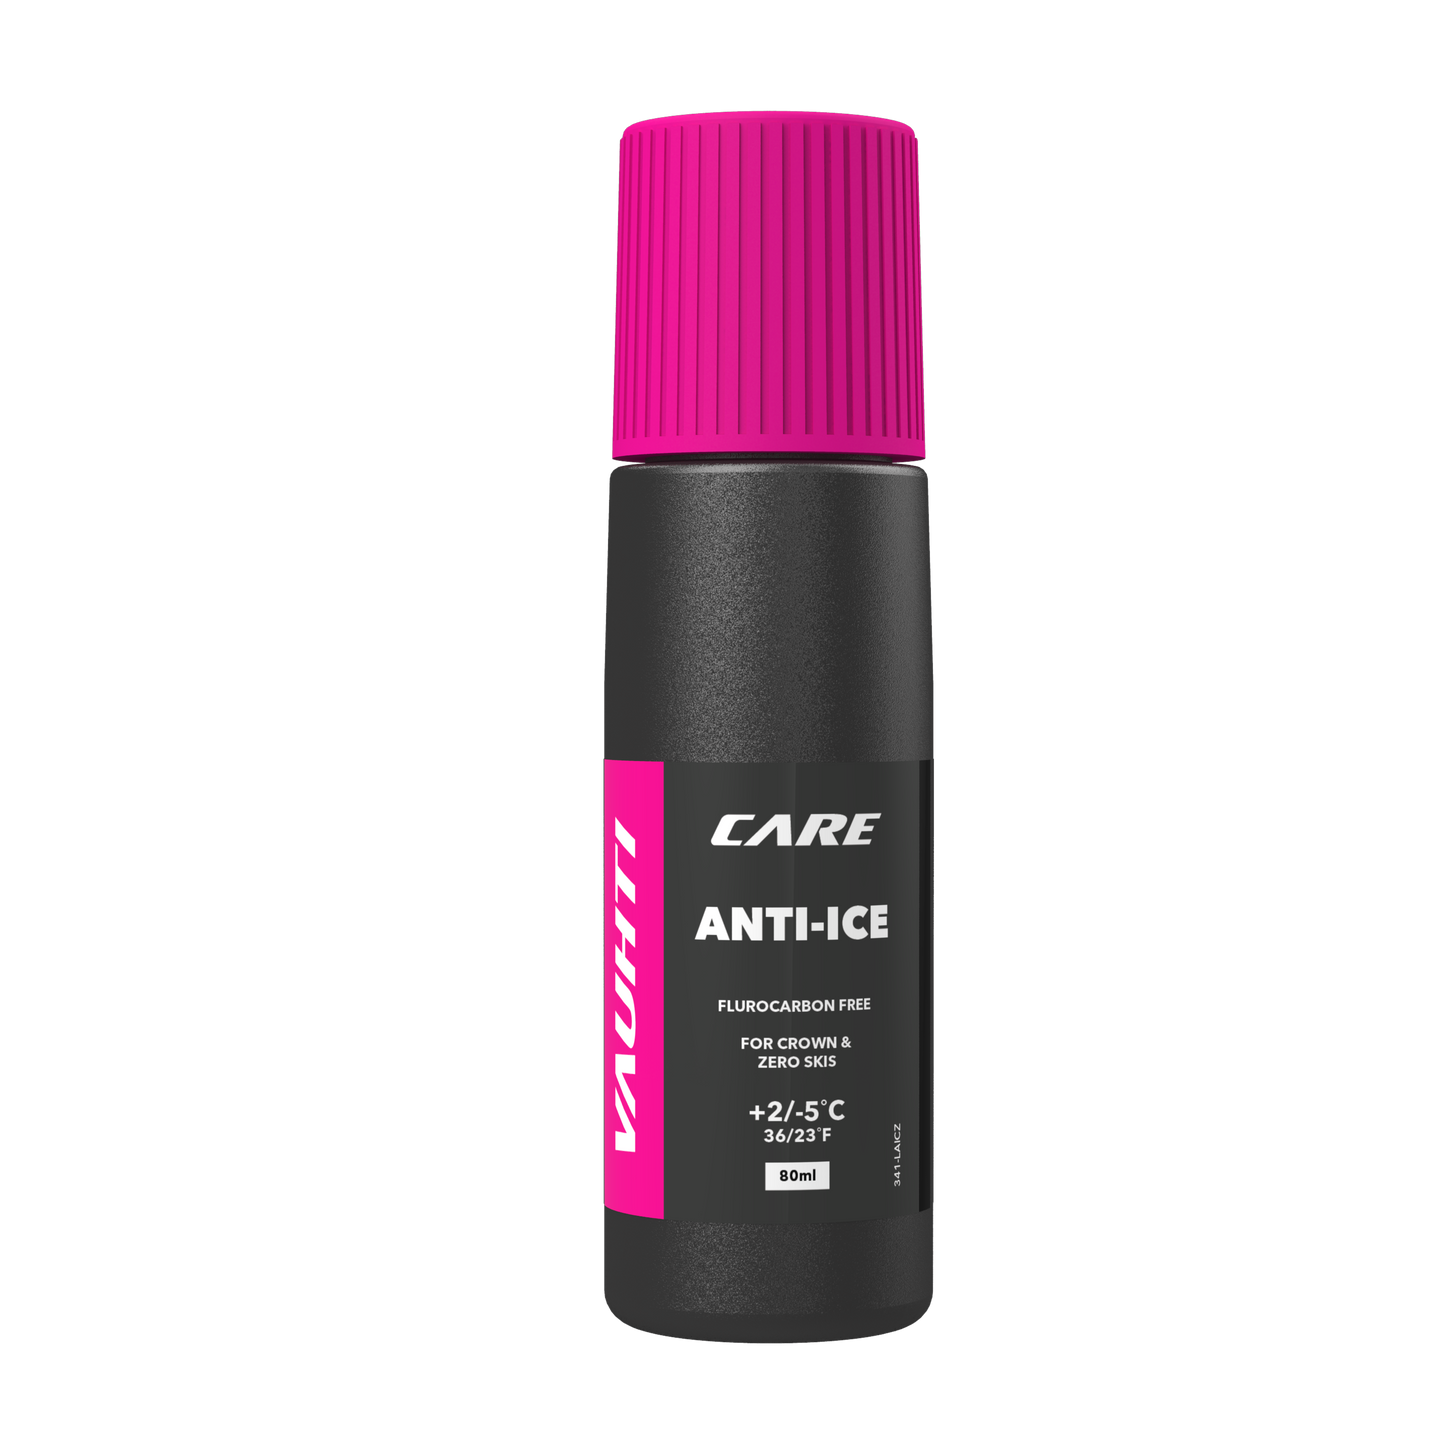 Anti-ice agent for crown & zero skis. Use on new snow close to zero degrees to prevent icing. 